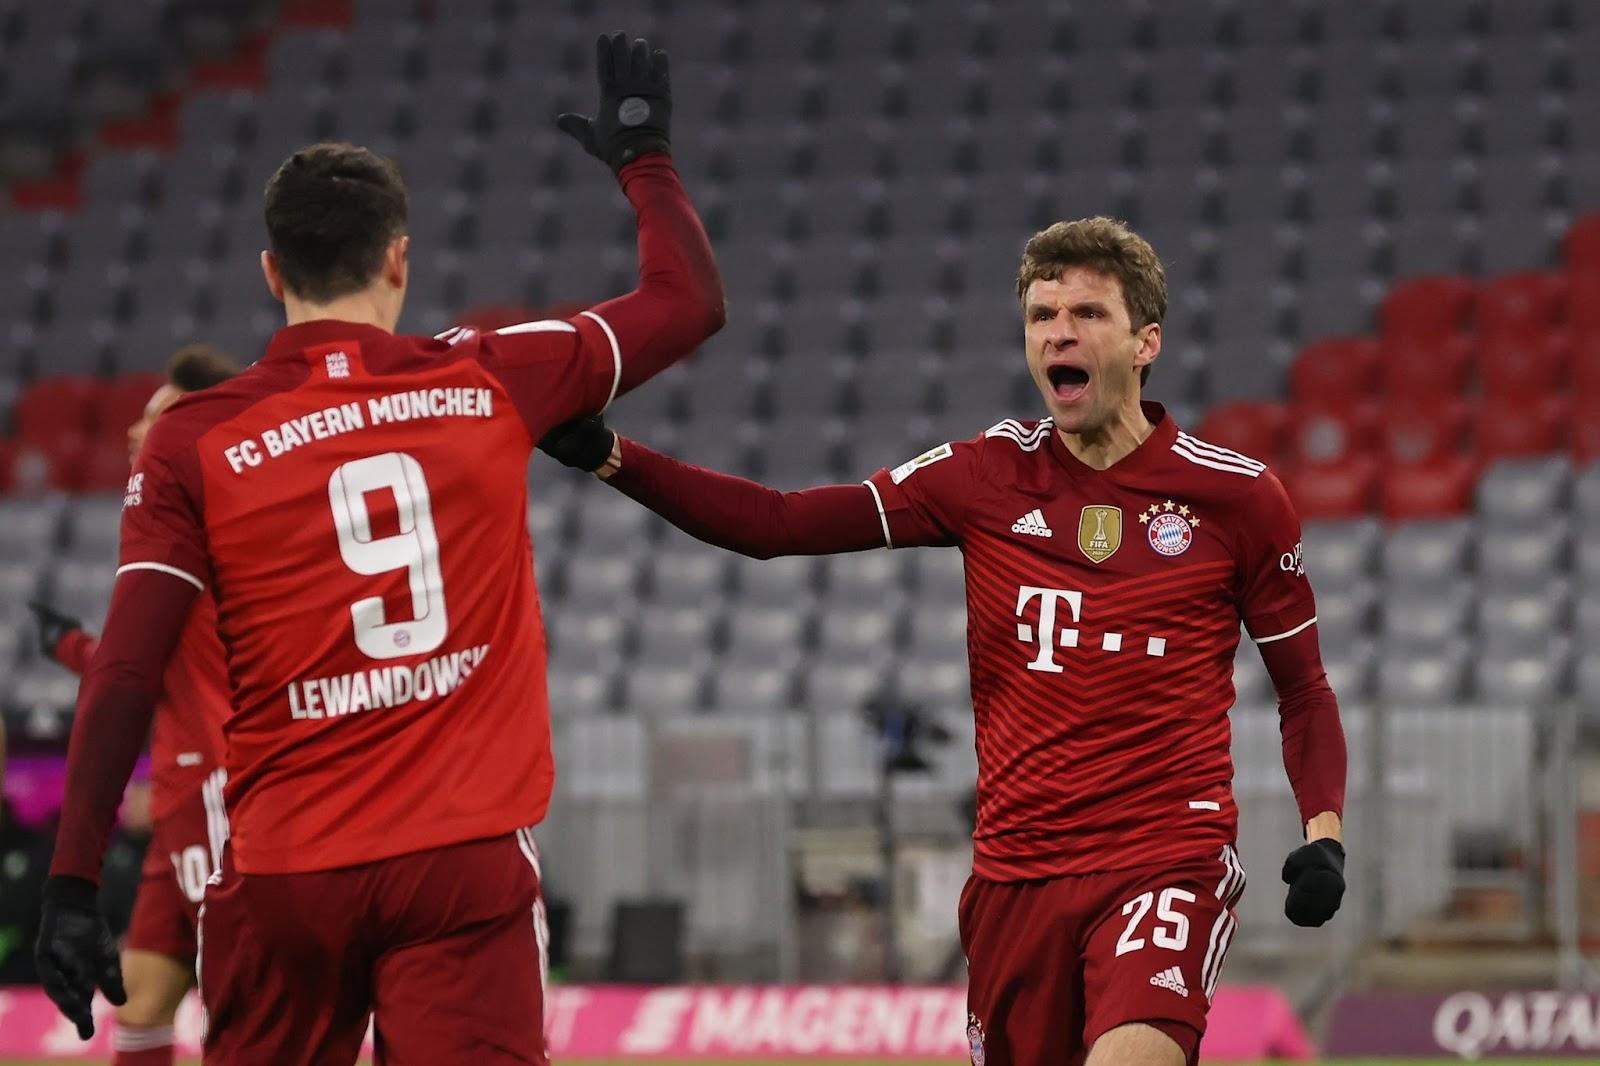 With Robert Lewandowski’s future up in the air, a lot will be riding on Thomas Muller’s shoulders this term